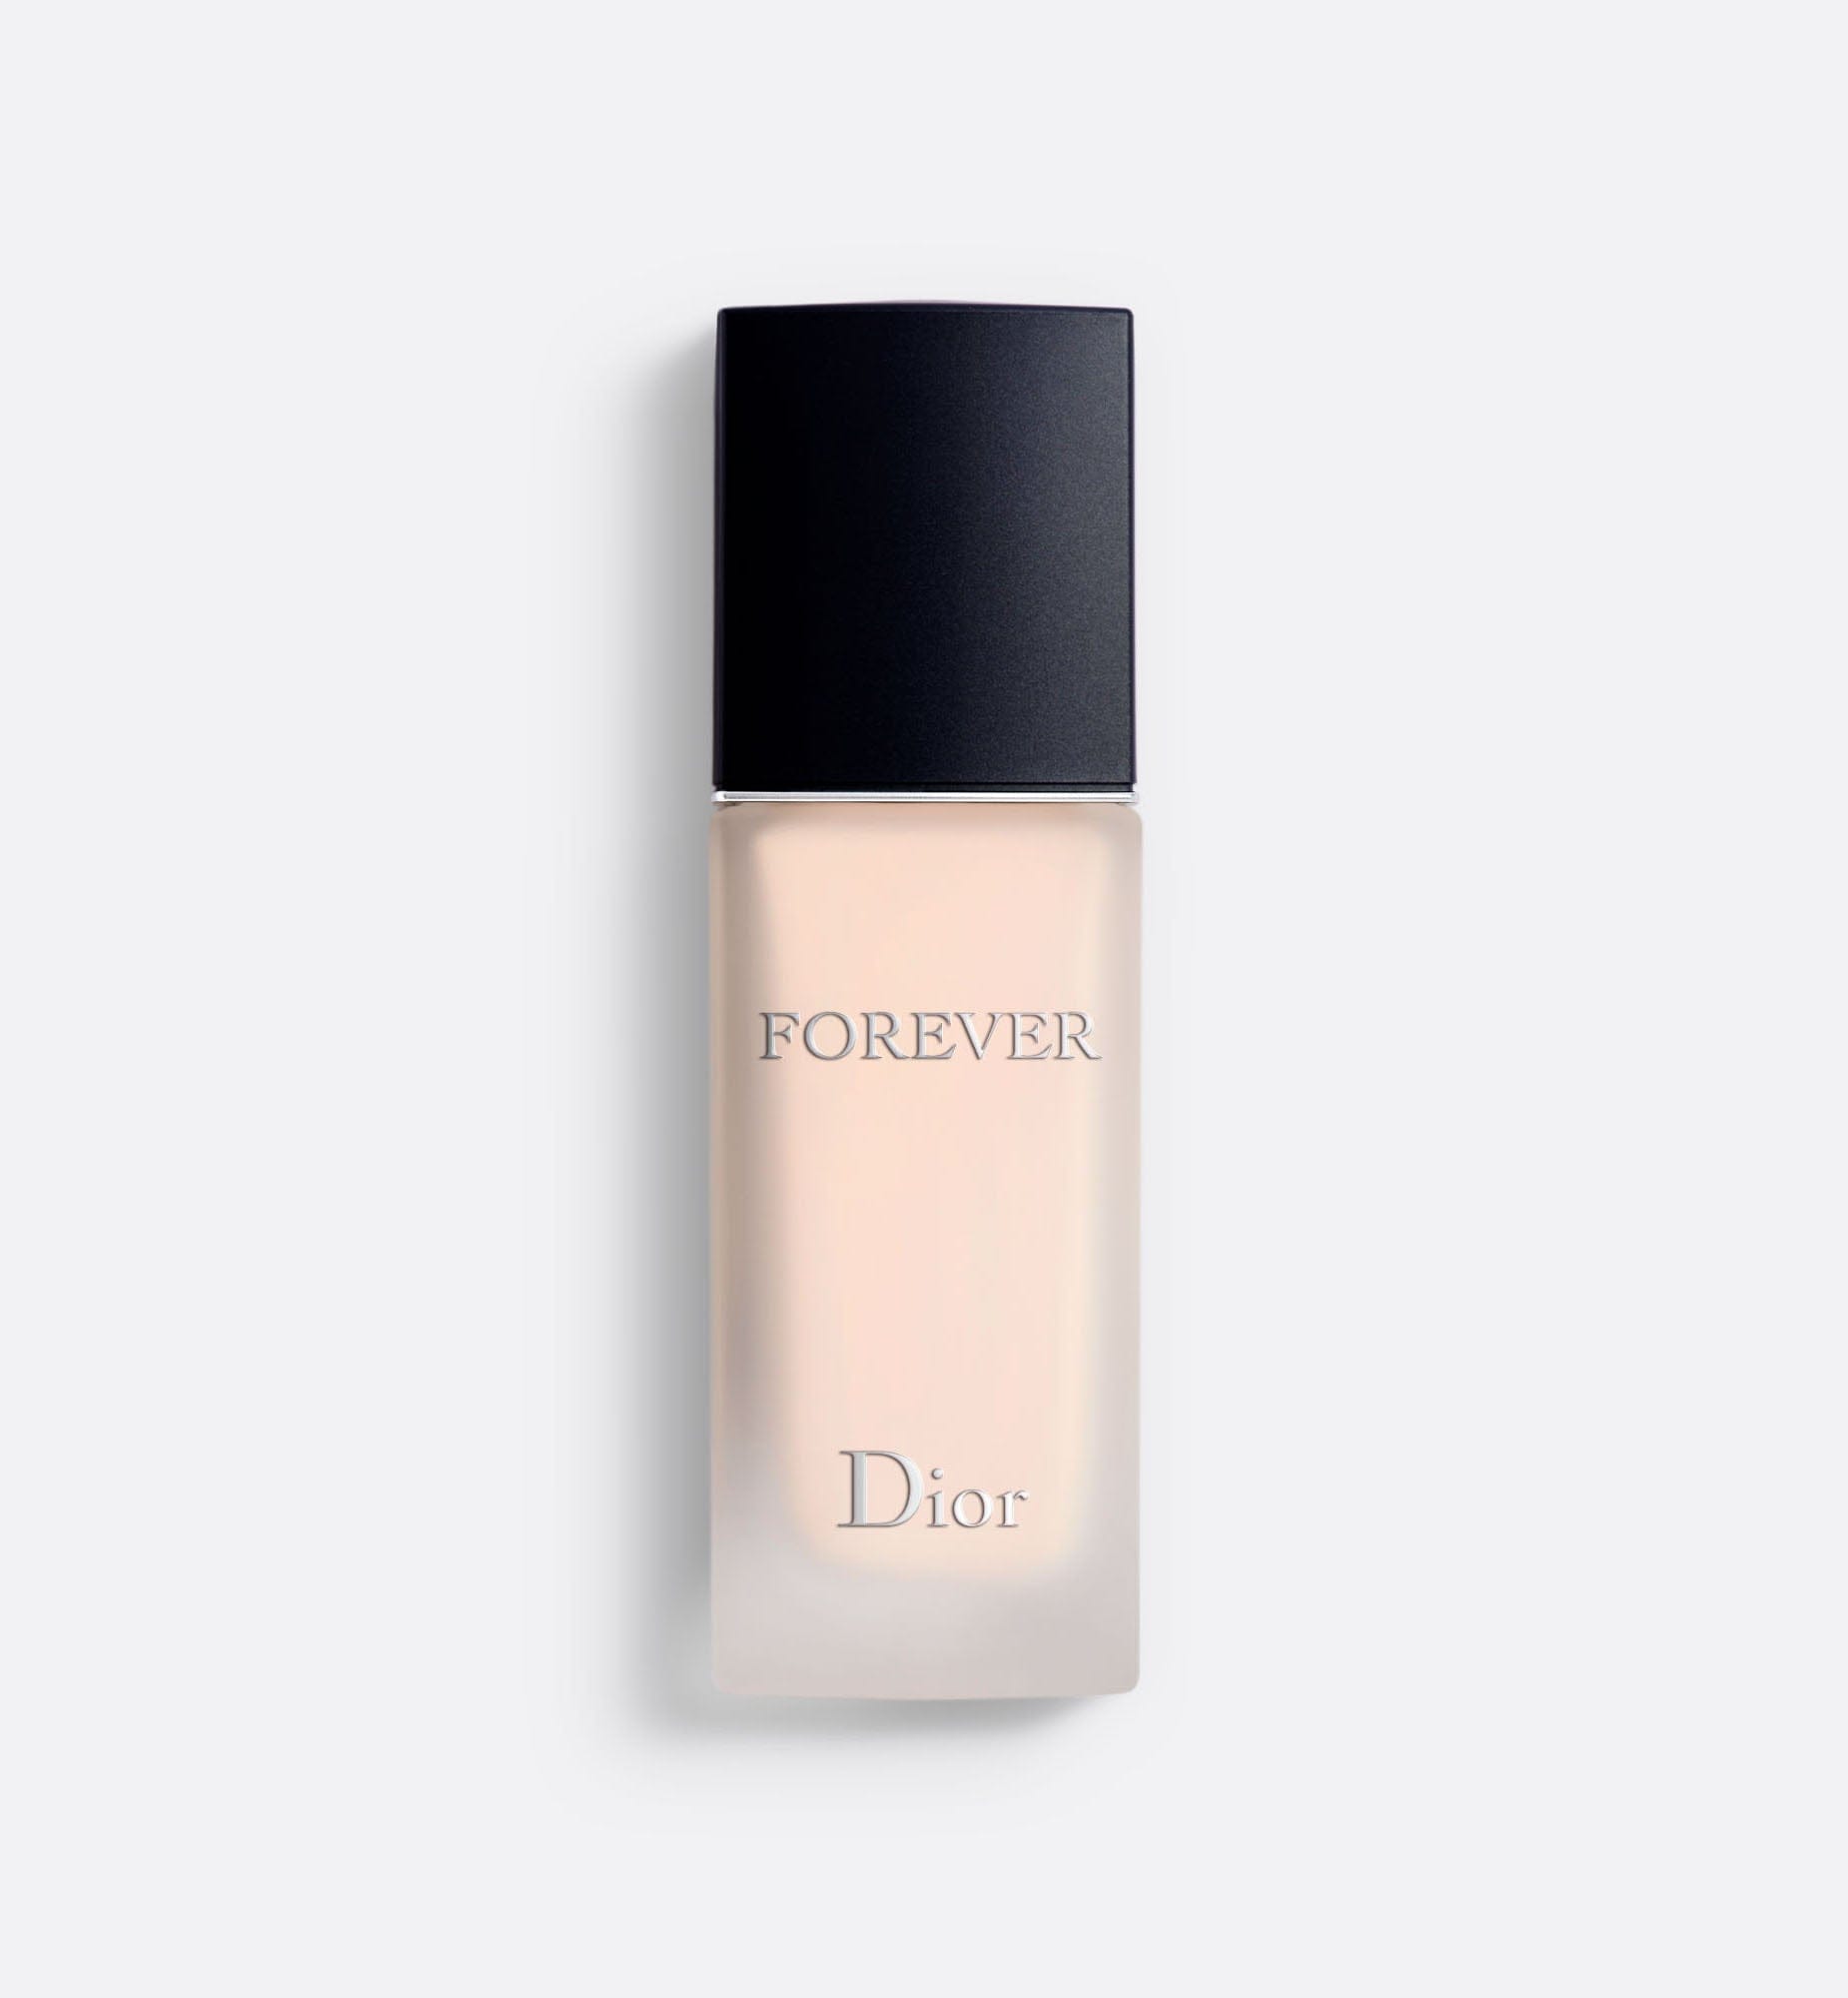 Dior Forever | Clean Matte Foundation - 24h Wear - No Transfer - Concentrated in Skincare